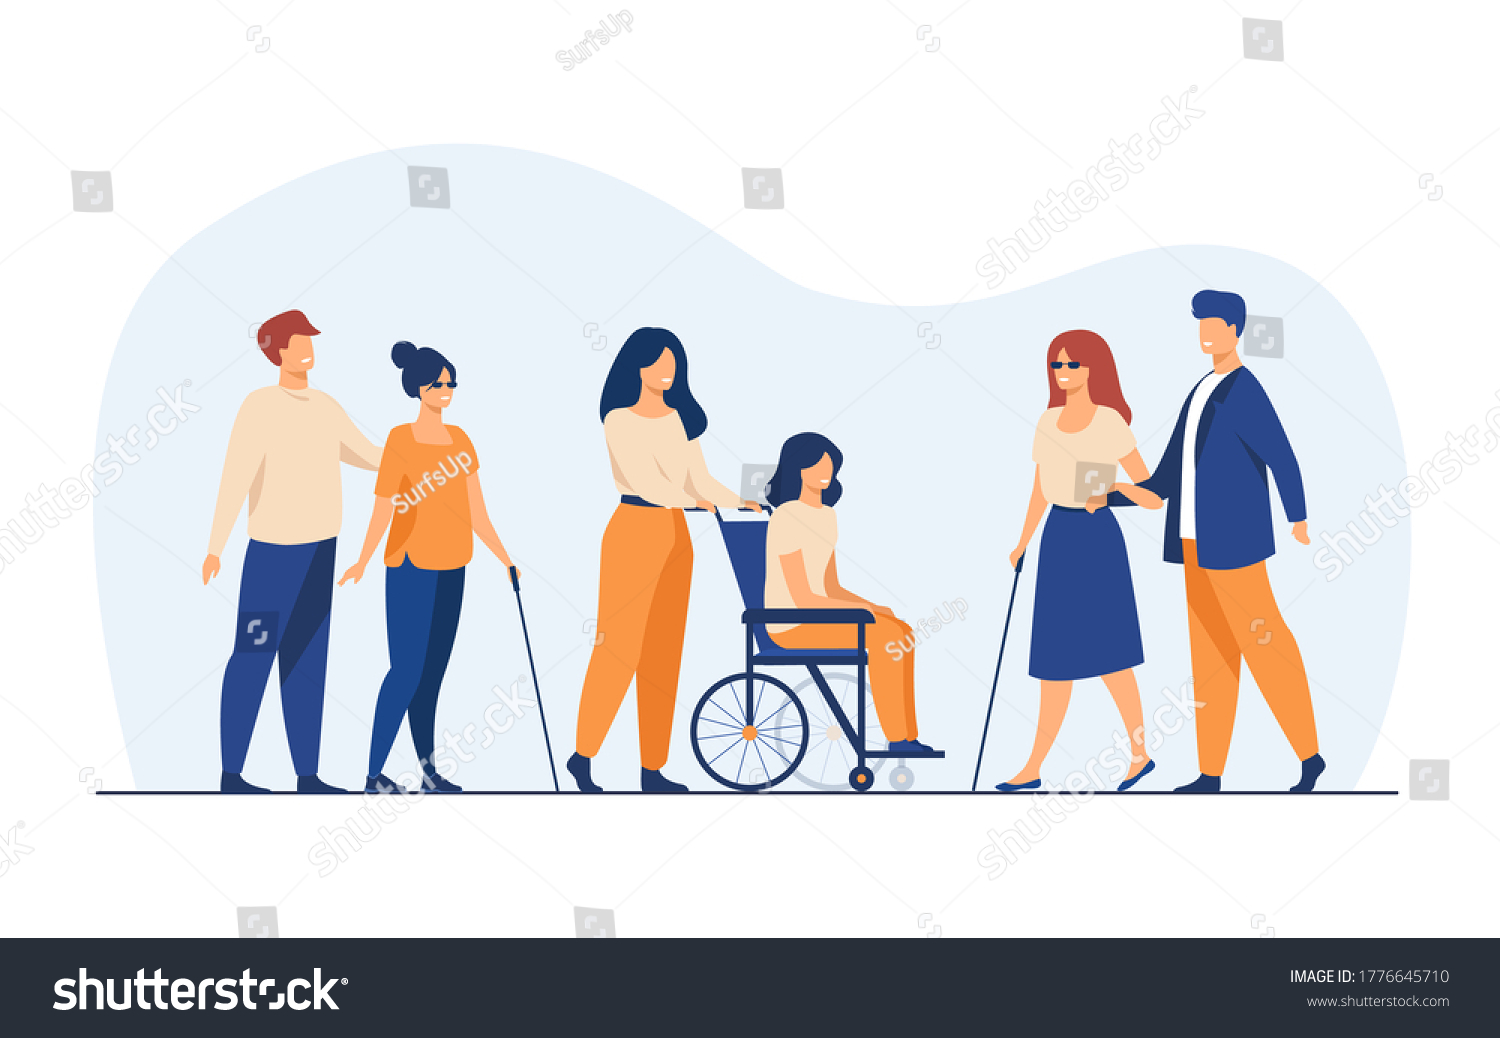 SVG of Volunteers helping disabled friends in outdoor walking, leading blind people or wheeling wheelchair. Can be used for disability, diversity, assistance concept svg